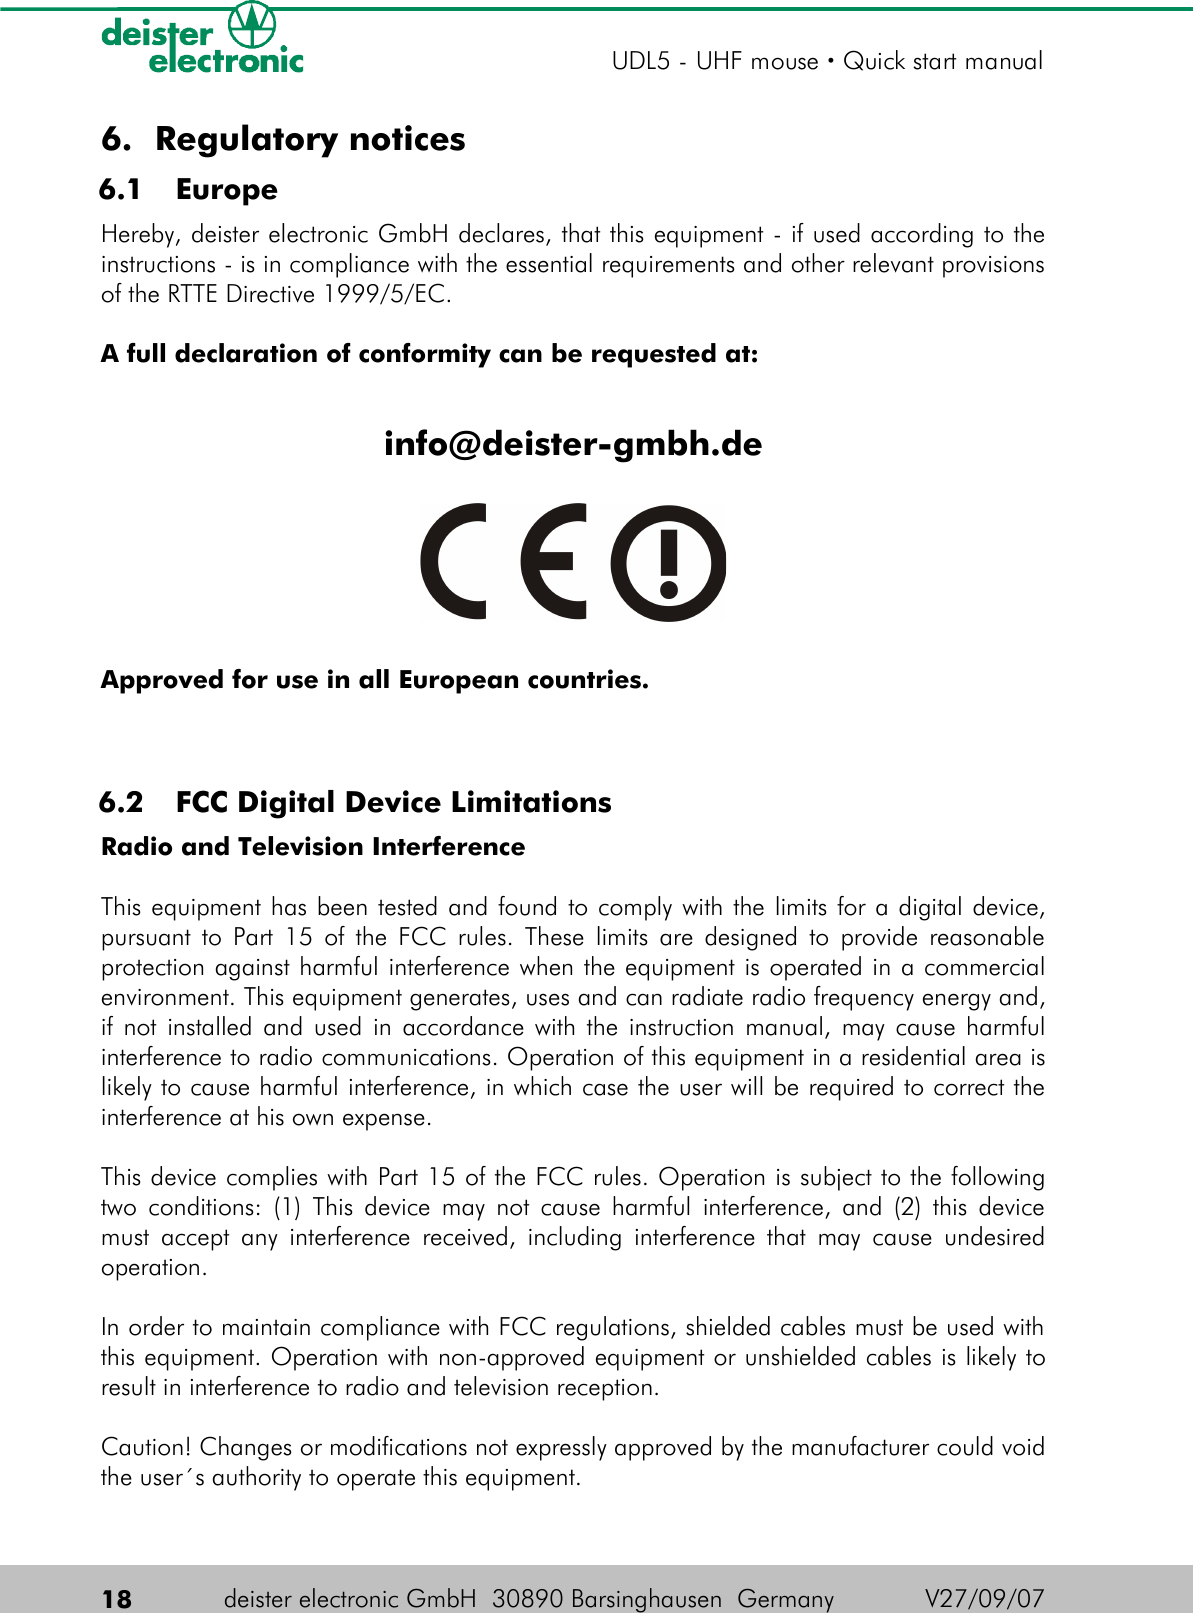 6. Regulatory notices 6.1  EuropeHereby, deister electronic GmbH declares, that this equipment - if used according to the instructions - is in compliance with the essential requirements and other relevant provisions of the RTTE Directive 1999/5/EC.A full declaration of conformity can be requested at:info@deister-gmbh.deApproved for use in all European countries. 6.2  FCC Digital Device LimitationsRadio and Television InterferenceThis equipment has been tested and found to comply with the limits for a digital device, pursuant to Part 15 of the FCC rules. These limits are designed to provide reasonable protection against harmful interference when the equipment is operated in a commercial environment. This equipment generates, uses and can radiate radio frequency energy and, if not installed and used in accordance with the instruction manual, may cause harmful interference to radio communications. Operation of this equipment in a residential area is likely to cause harmful interference, in which case the user will be required to correct the interference at his own expense.This device complies with Part 15 of the FCC rules. Operation is subject to the following two conditions: (1) This device may not cause harmful interference, and (2) this device must accept any interference received, including interference that may cause undesired operation.In order to maintain compliance with FCC regulations, shielded cables must be used with this equipment. Operation with non-approved equipment or unshielded cables is likely to result in interference to radio and television reception.Caution! Changes or modifications not expressly approved by the manufacturer could void the user´s authority to operate this equipment.18 deister electronic GmbH  30890 Barsinghausen  Germany  V27/09/07UDL5 - UHF mouse · Quick start manual